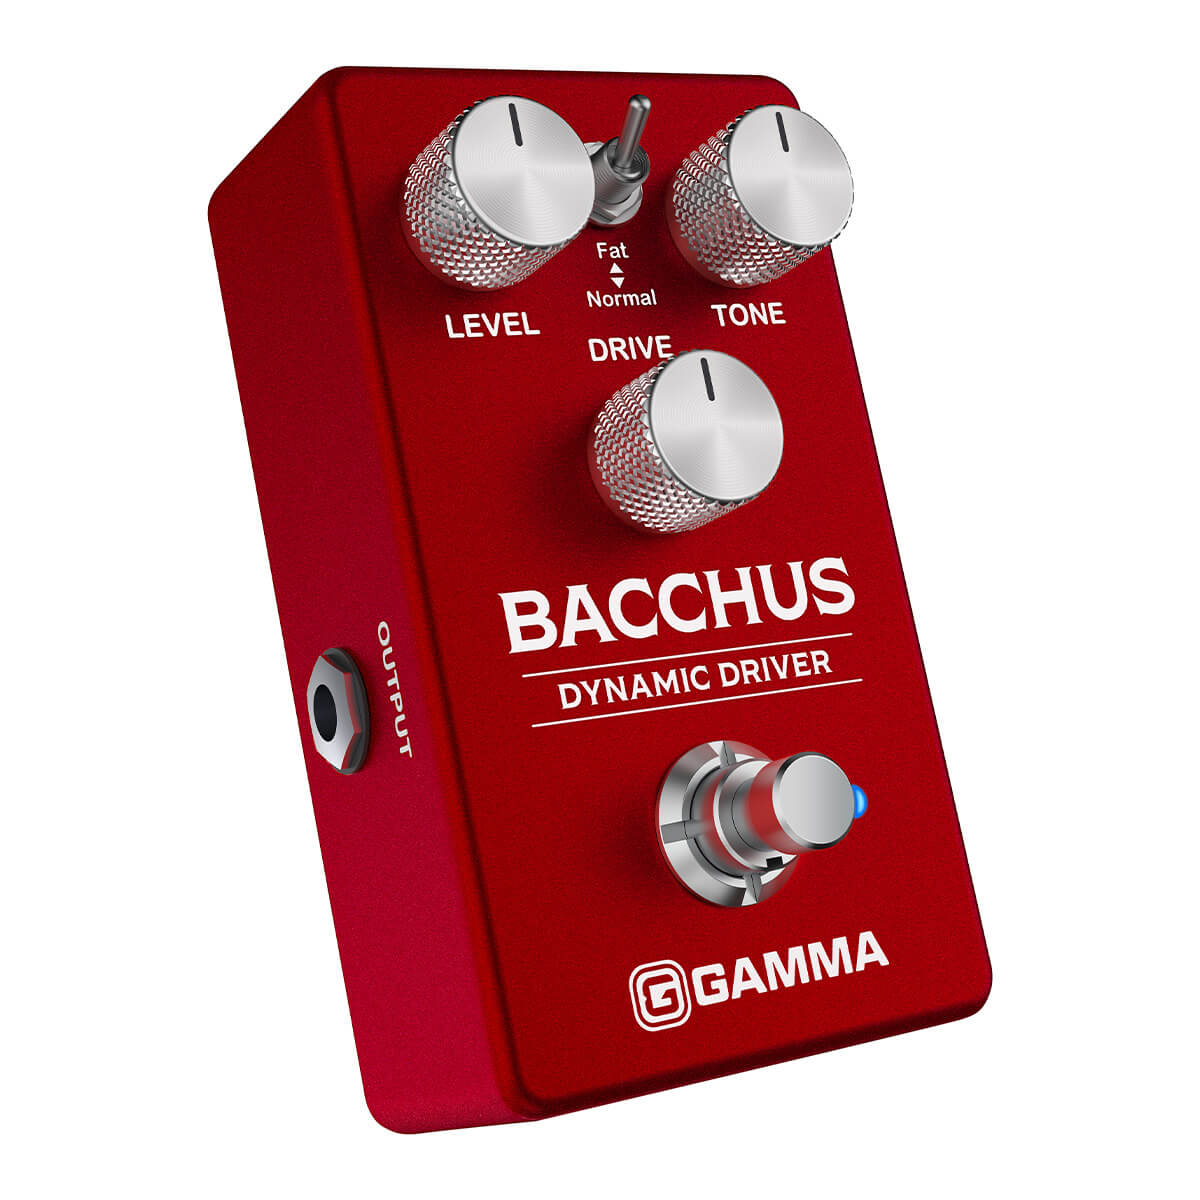 Gamma Bacchus dynamic driver pedal angled right.